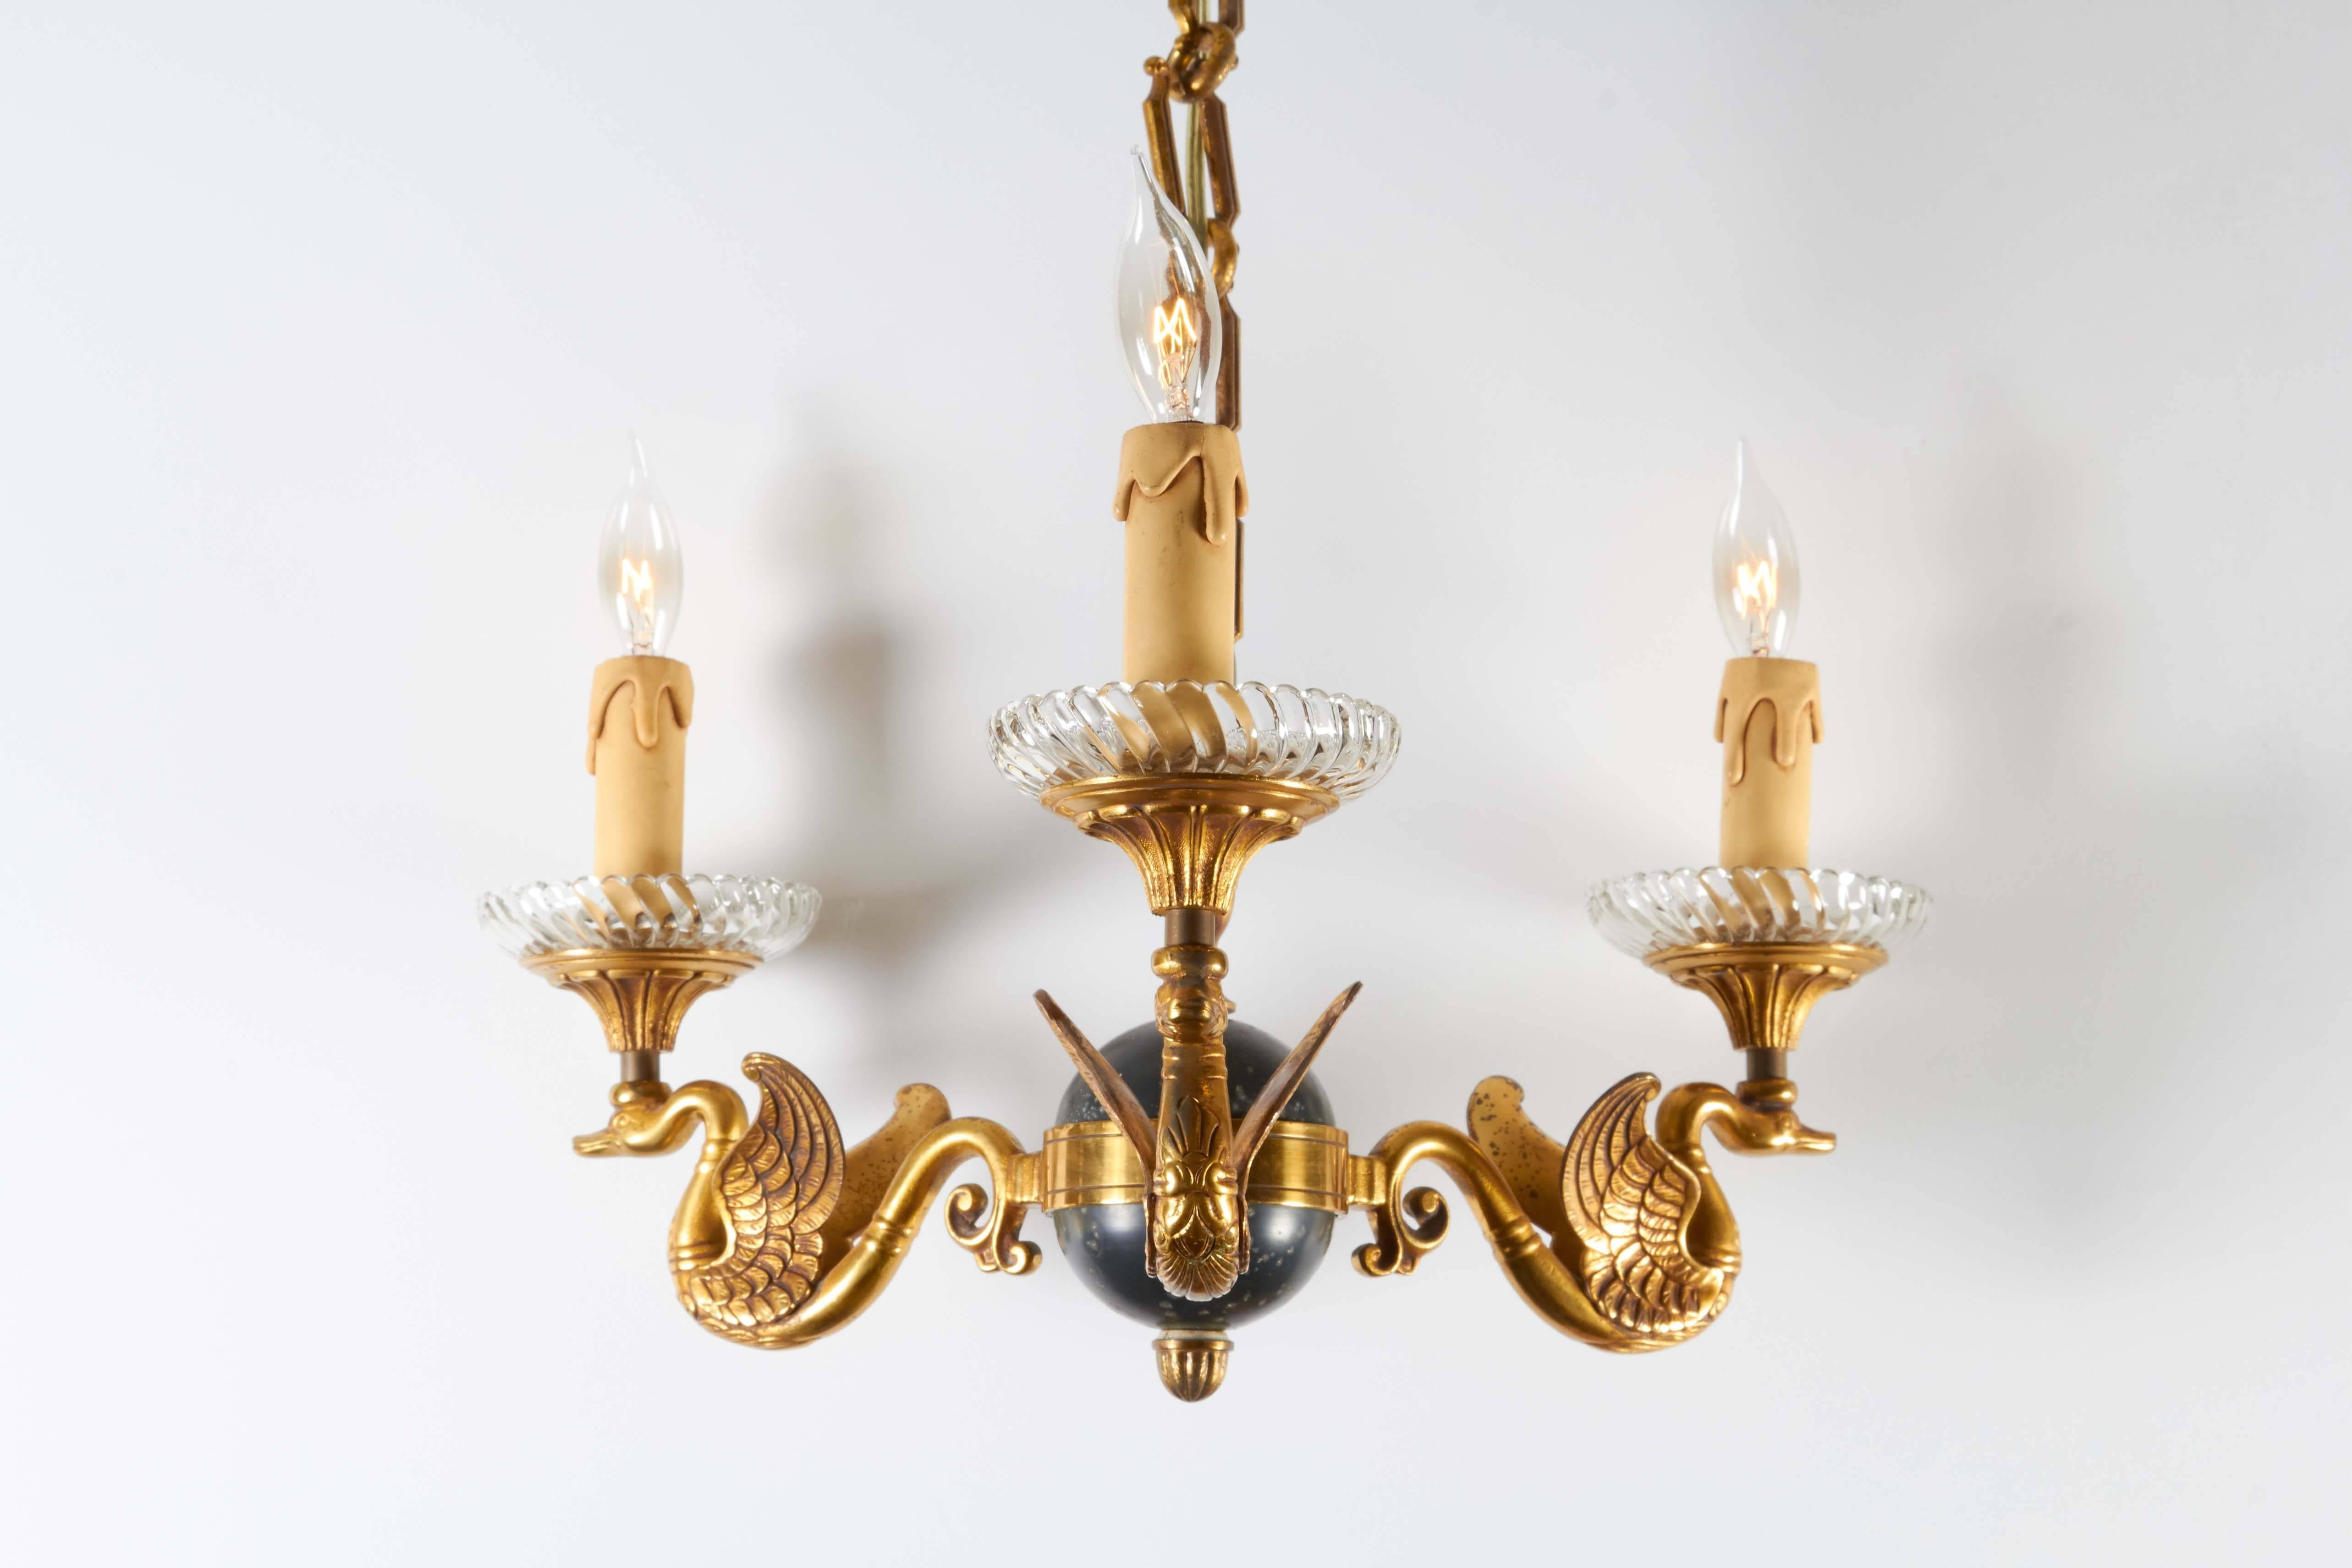 A 1940s Italian chandelier, designed in the Empire style, with black celestial globe, supporting three scrolling brass arms with swan motif, each topped with ribbed glass bobeche and faux wax candle socket covers, suspended by original heavy chain